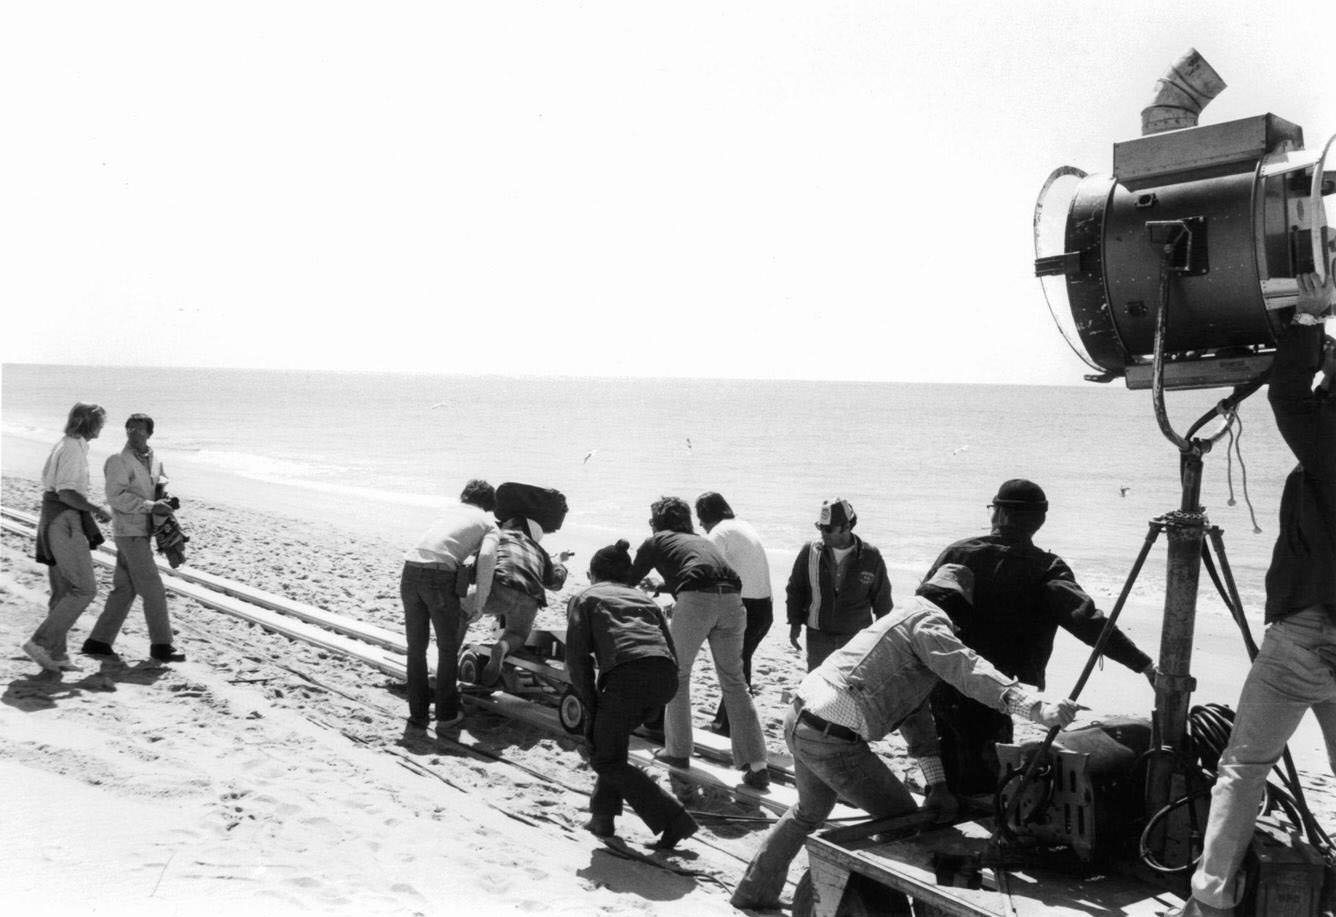 Roy Scheider (2nd left) on beach as crew films in a scene from 'Jaws', 1975.